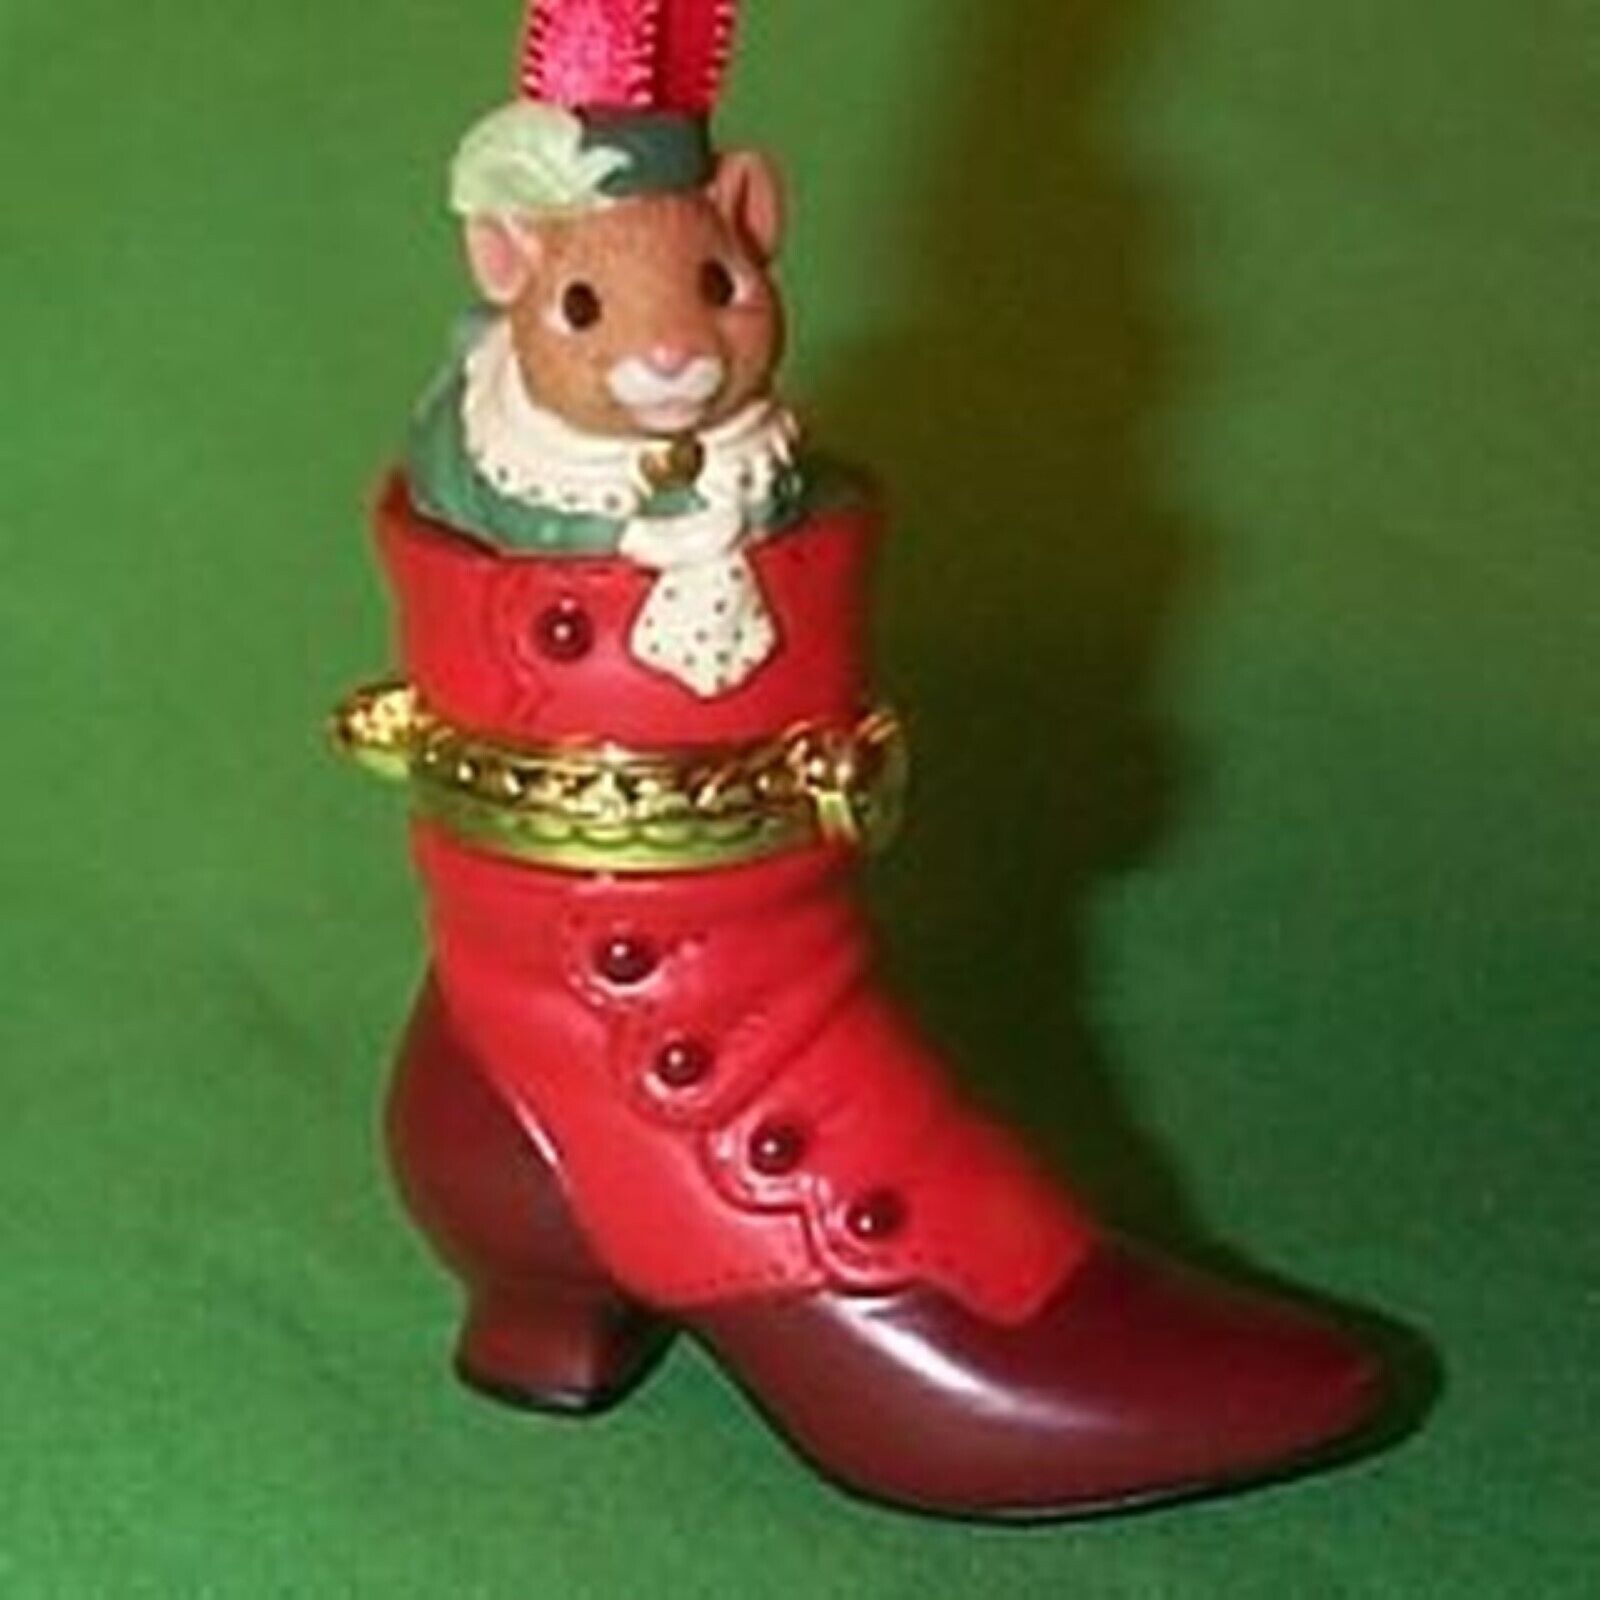 \'Fashion Afoot - Porcelain\' \'New Collector\'s Series\' NEW Hallmark 2000 Ornament